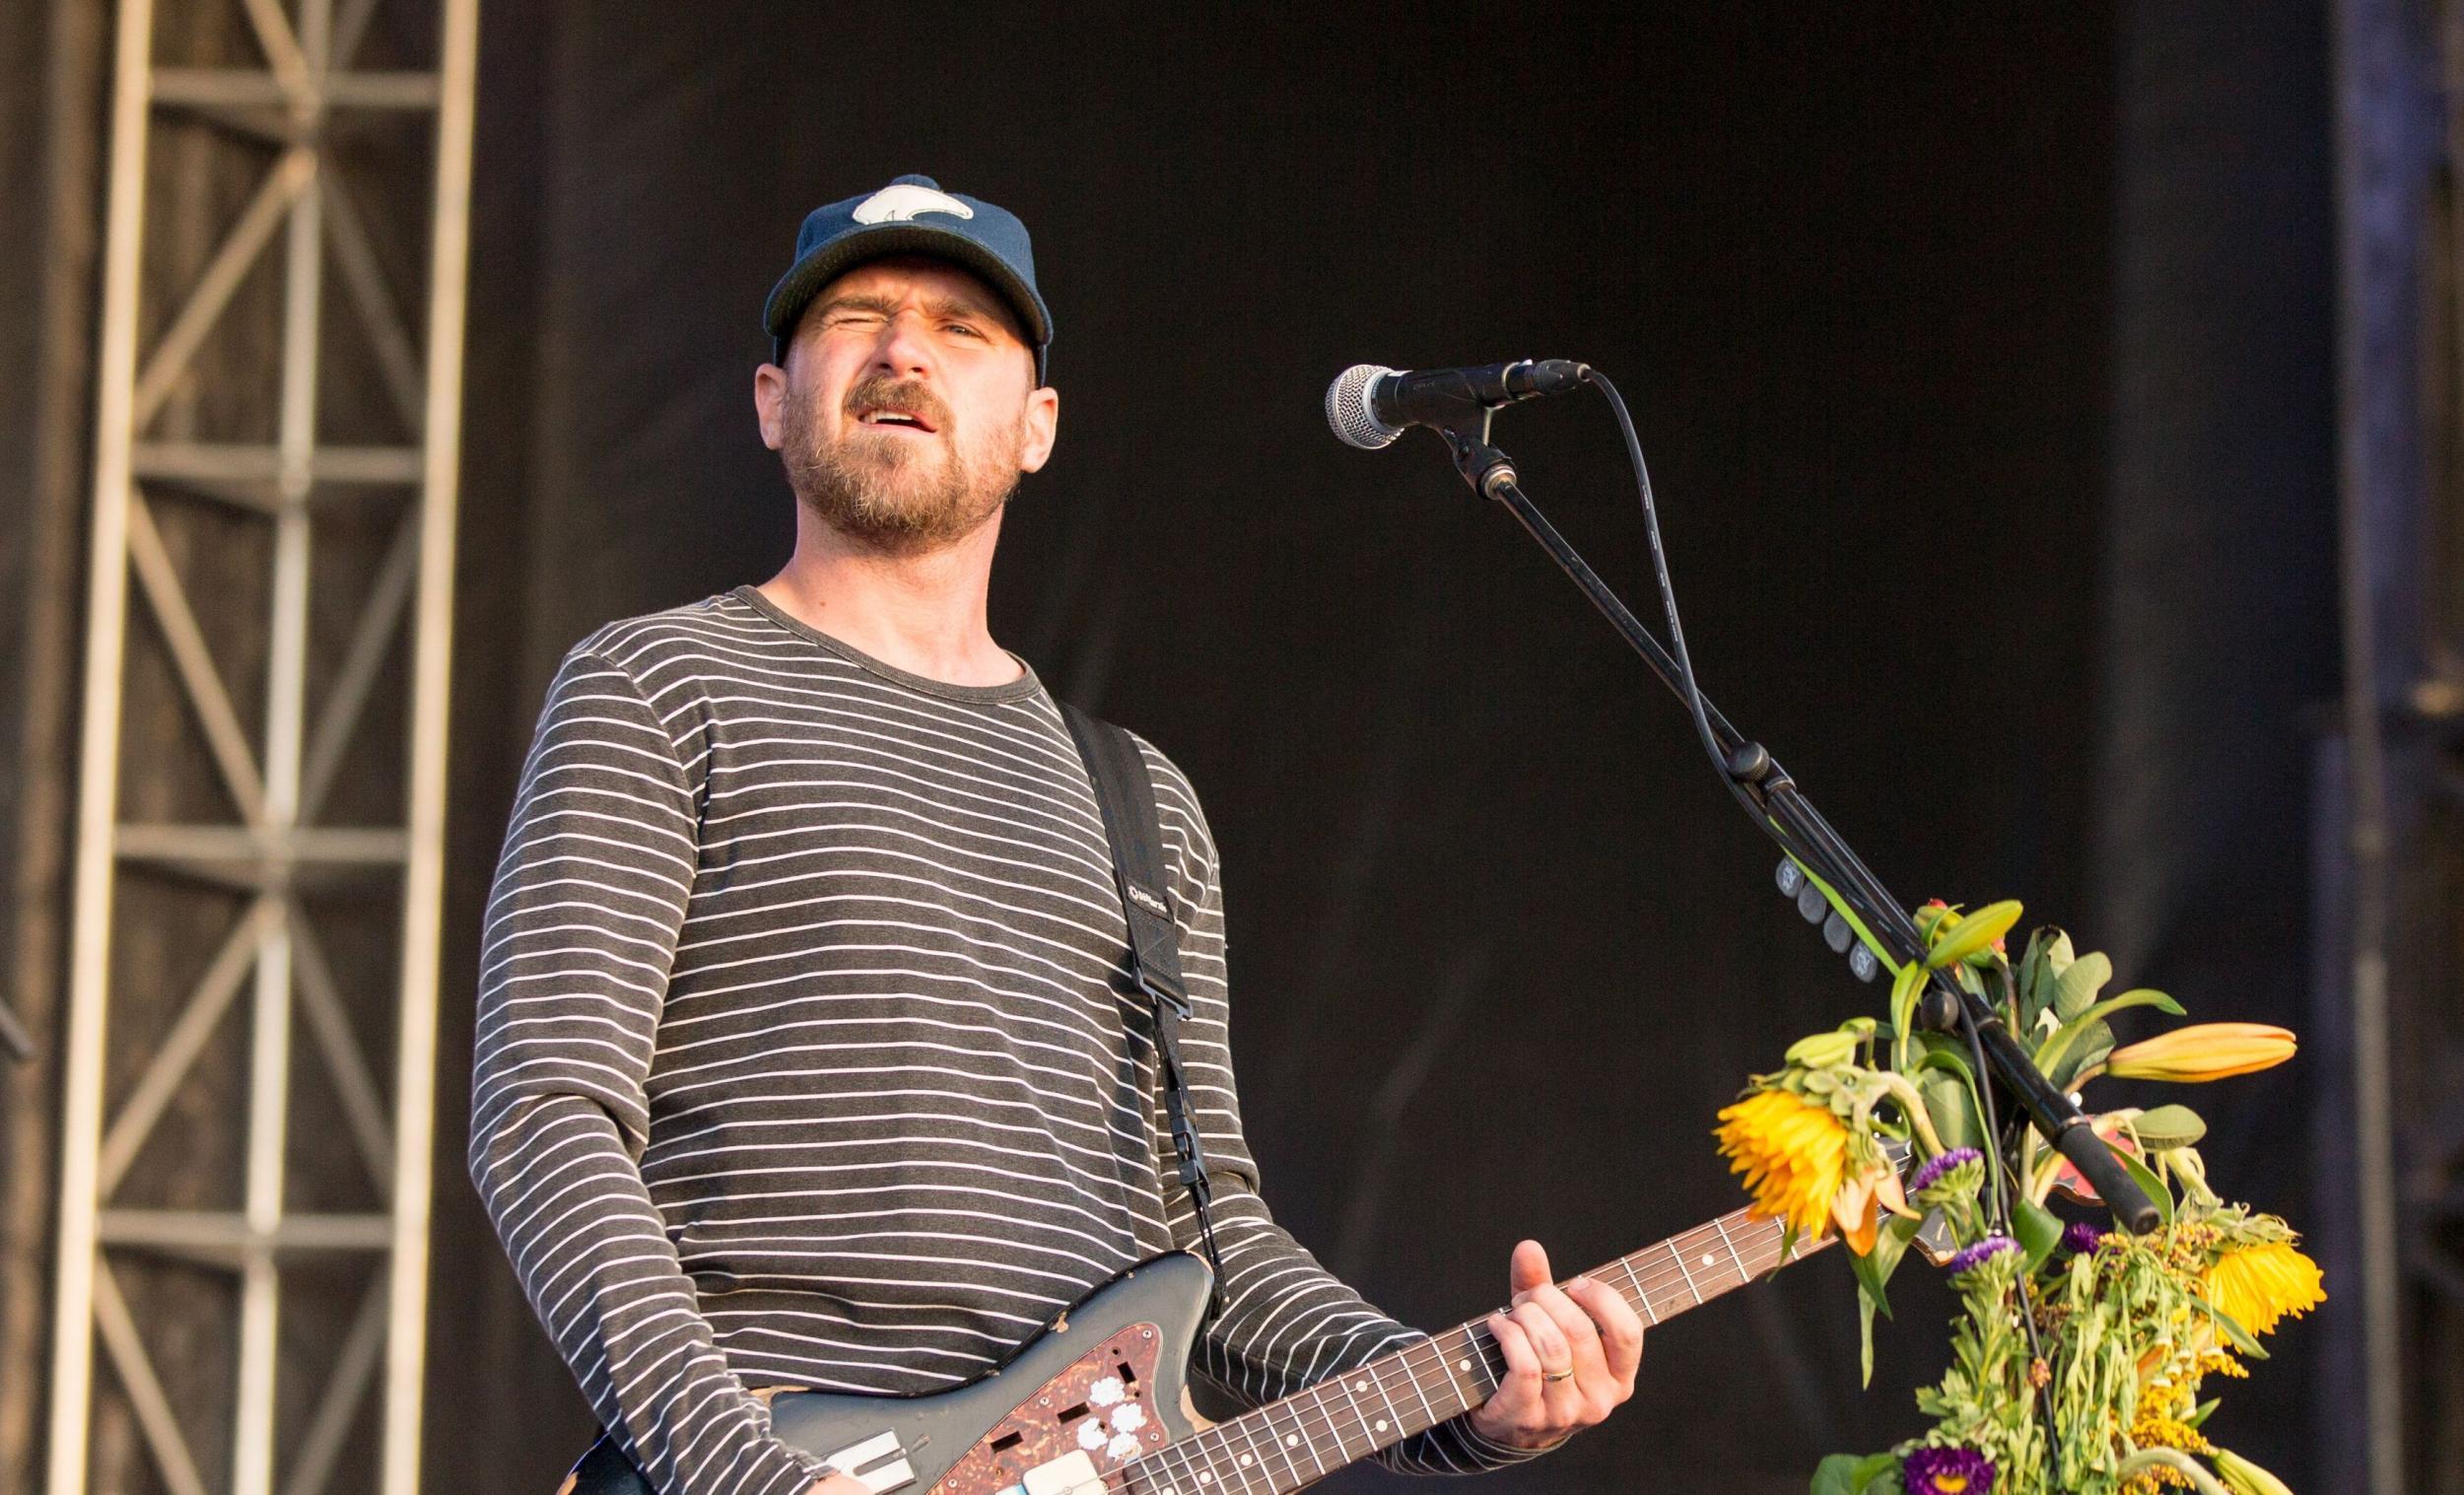 Brand New frontman Jesse Lacey in 2016